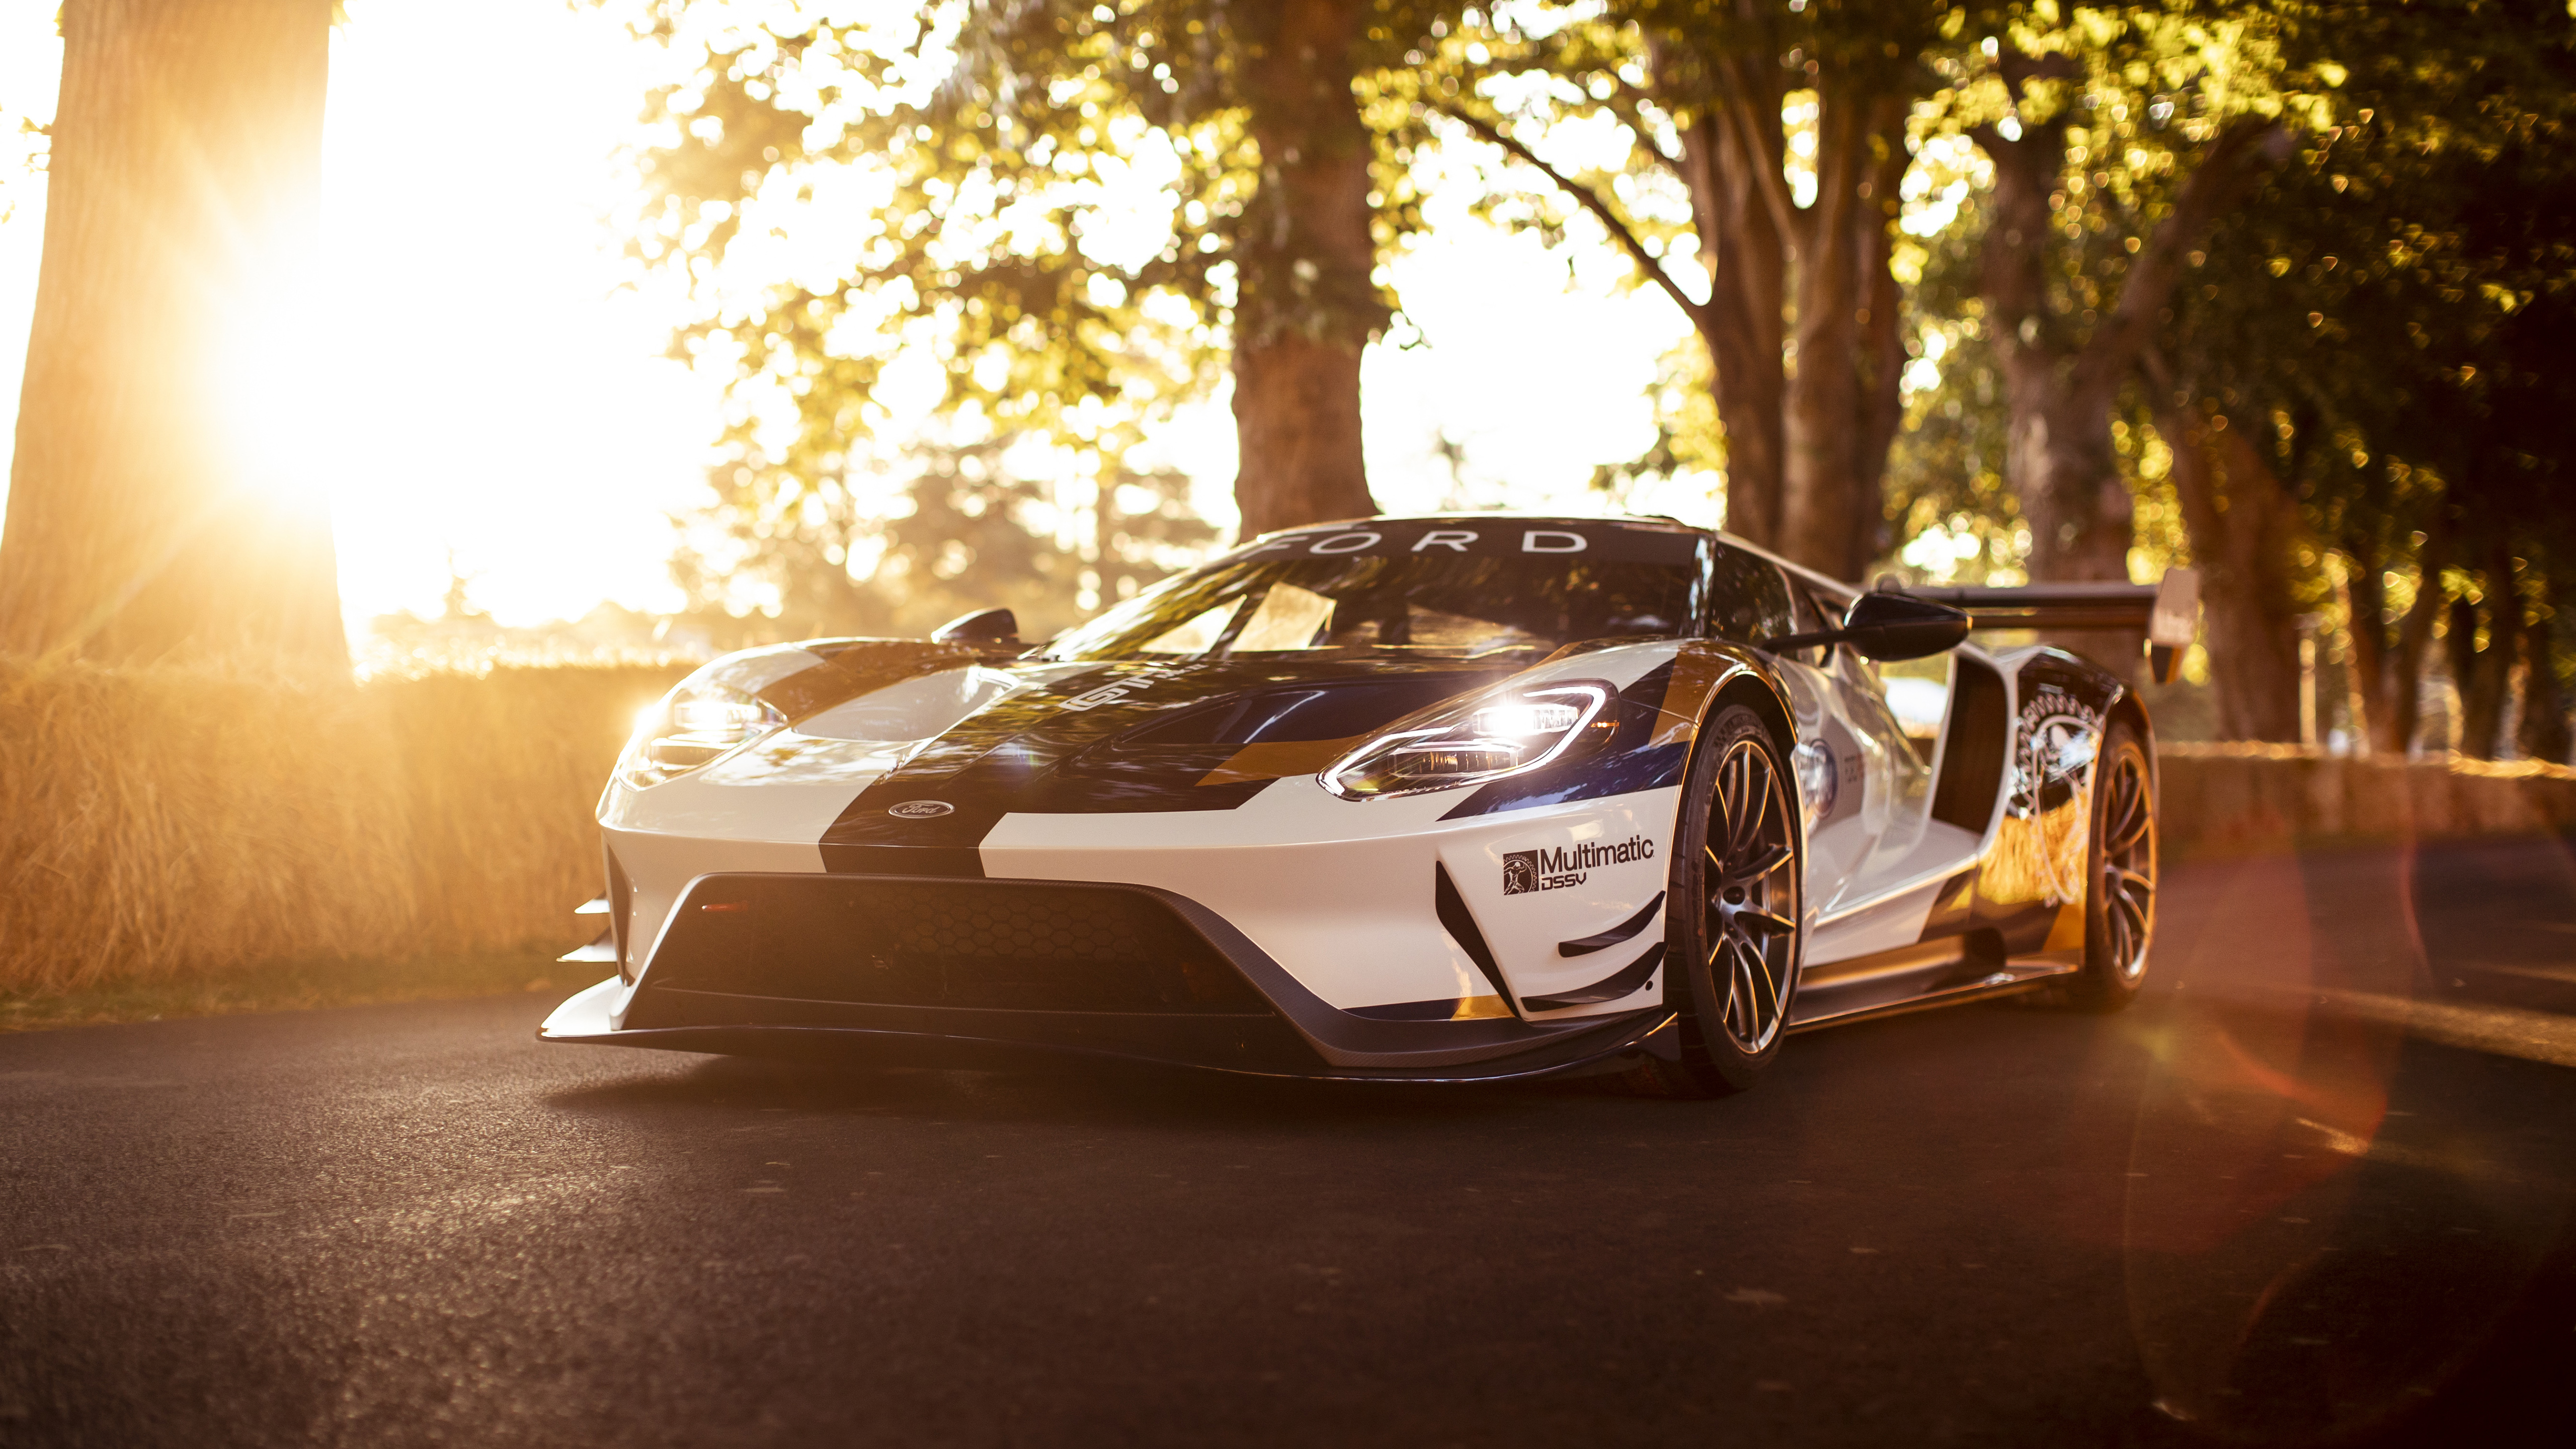 Free Download Ford Gt Mk Ii 2019 5k Wallpaper Hd Car Wallpapers Id 12835 5120x2880 For Your Desktop Mobile Tablet Explore 52 Ford Gt Mk Ii Sports Car 2019 Wallpapers